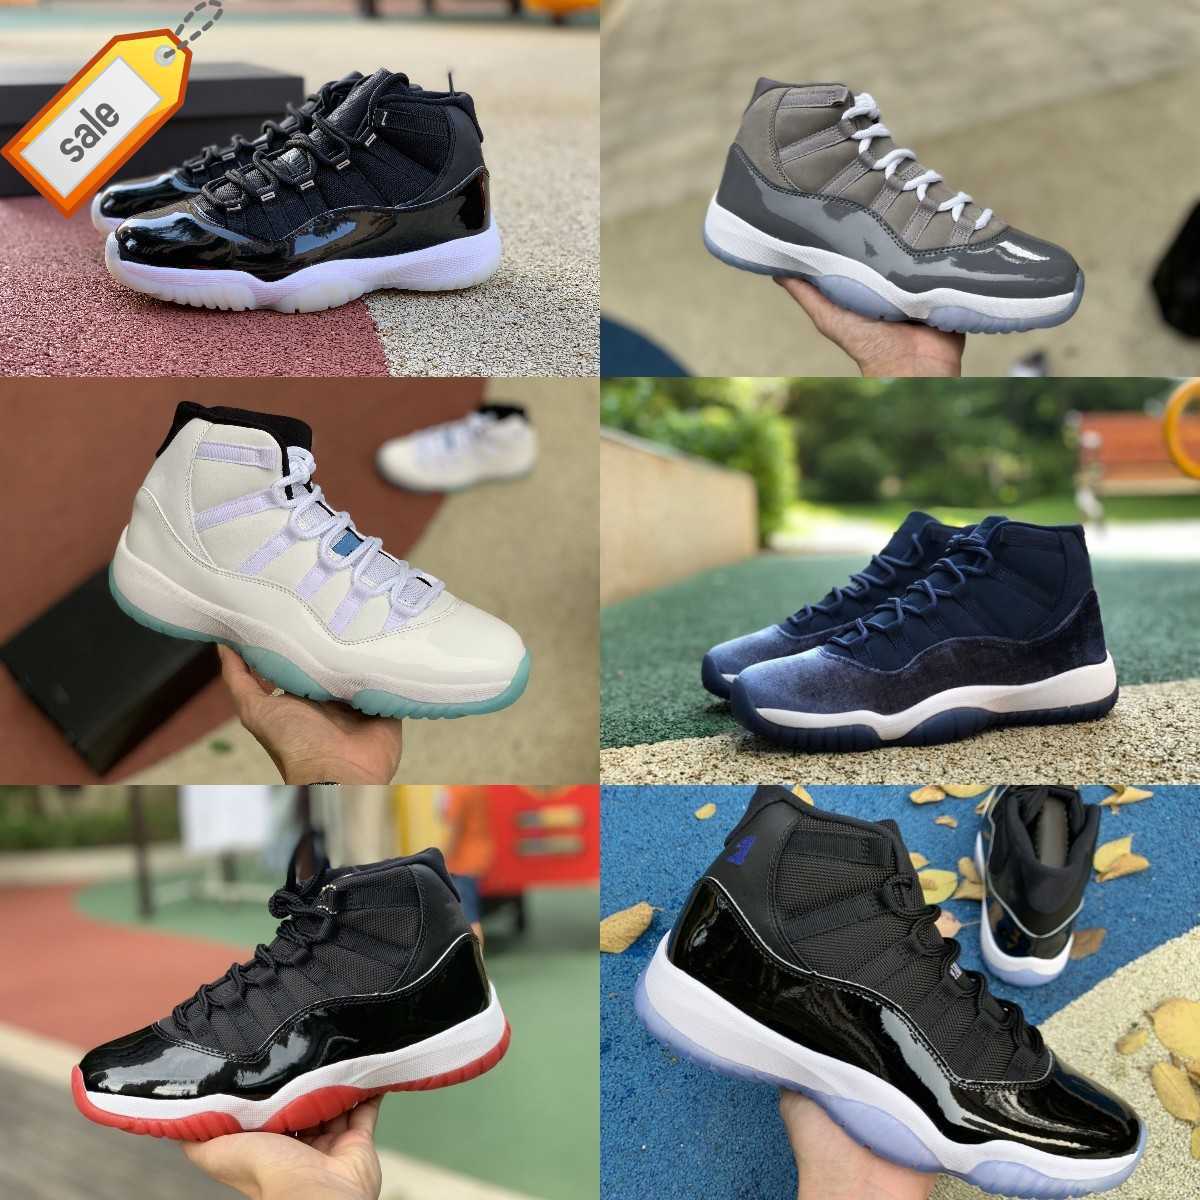 

TOP Jumpman Jubilee 11 11s High Basketball Shoes COOL GREY Legend Blue Midnight Navy Playoffs Bred Space Jam Gamma Blue Easter Concord 45, M303